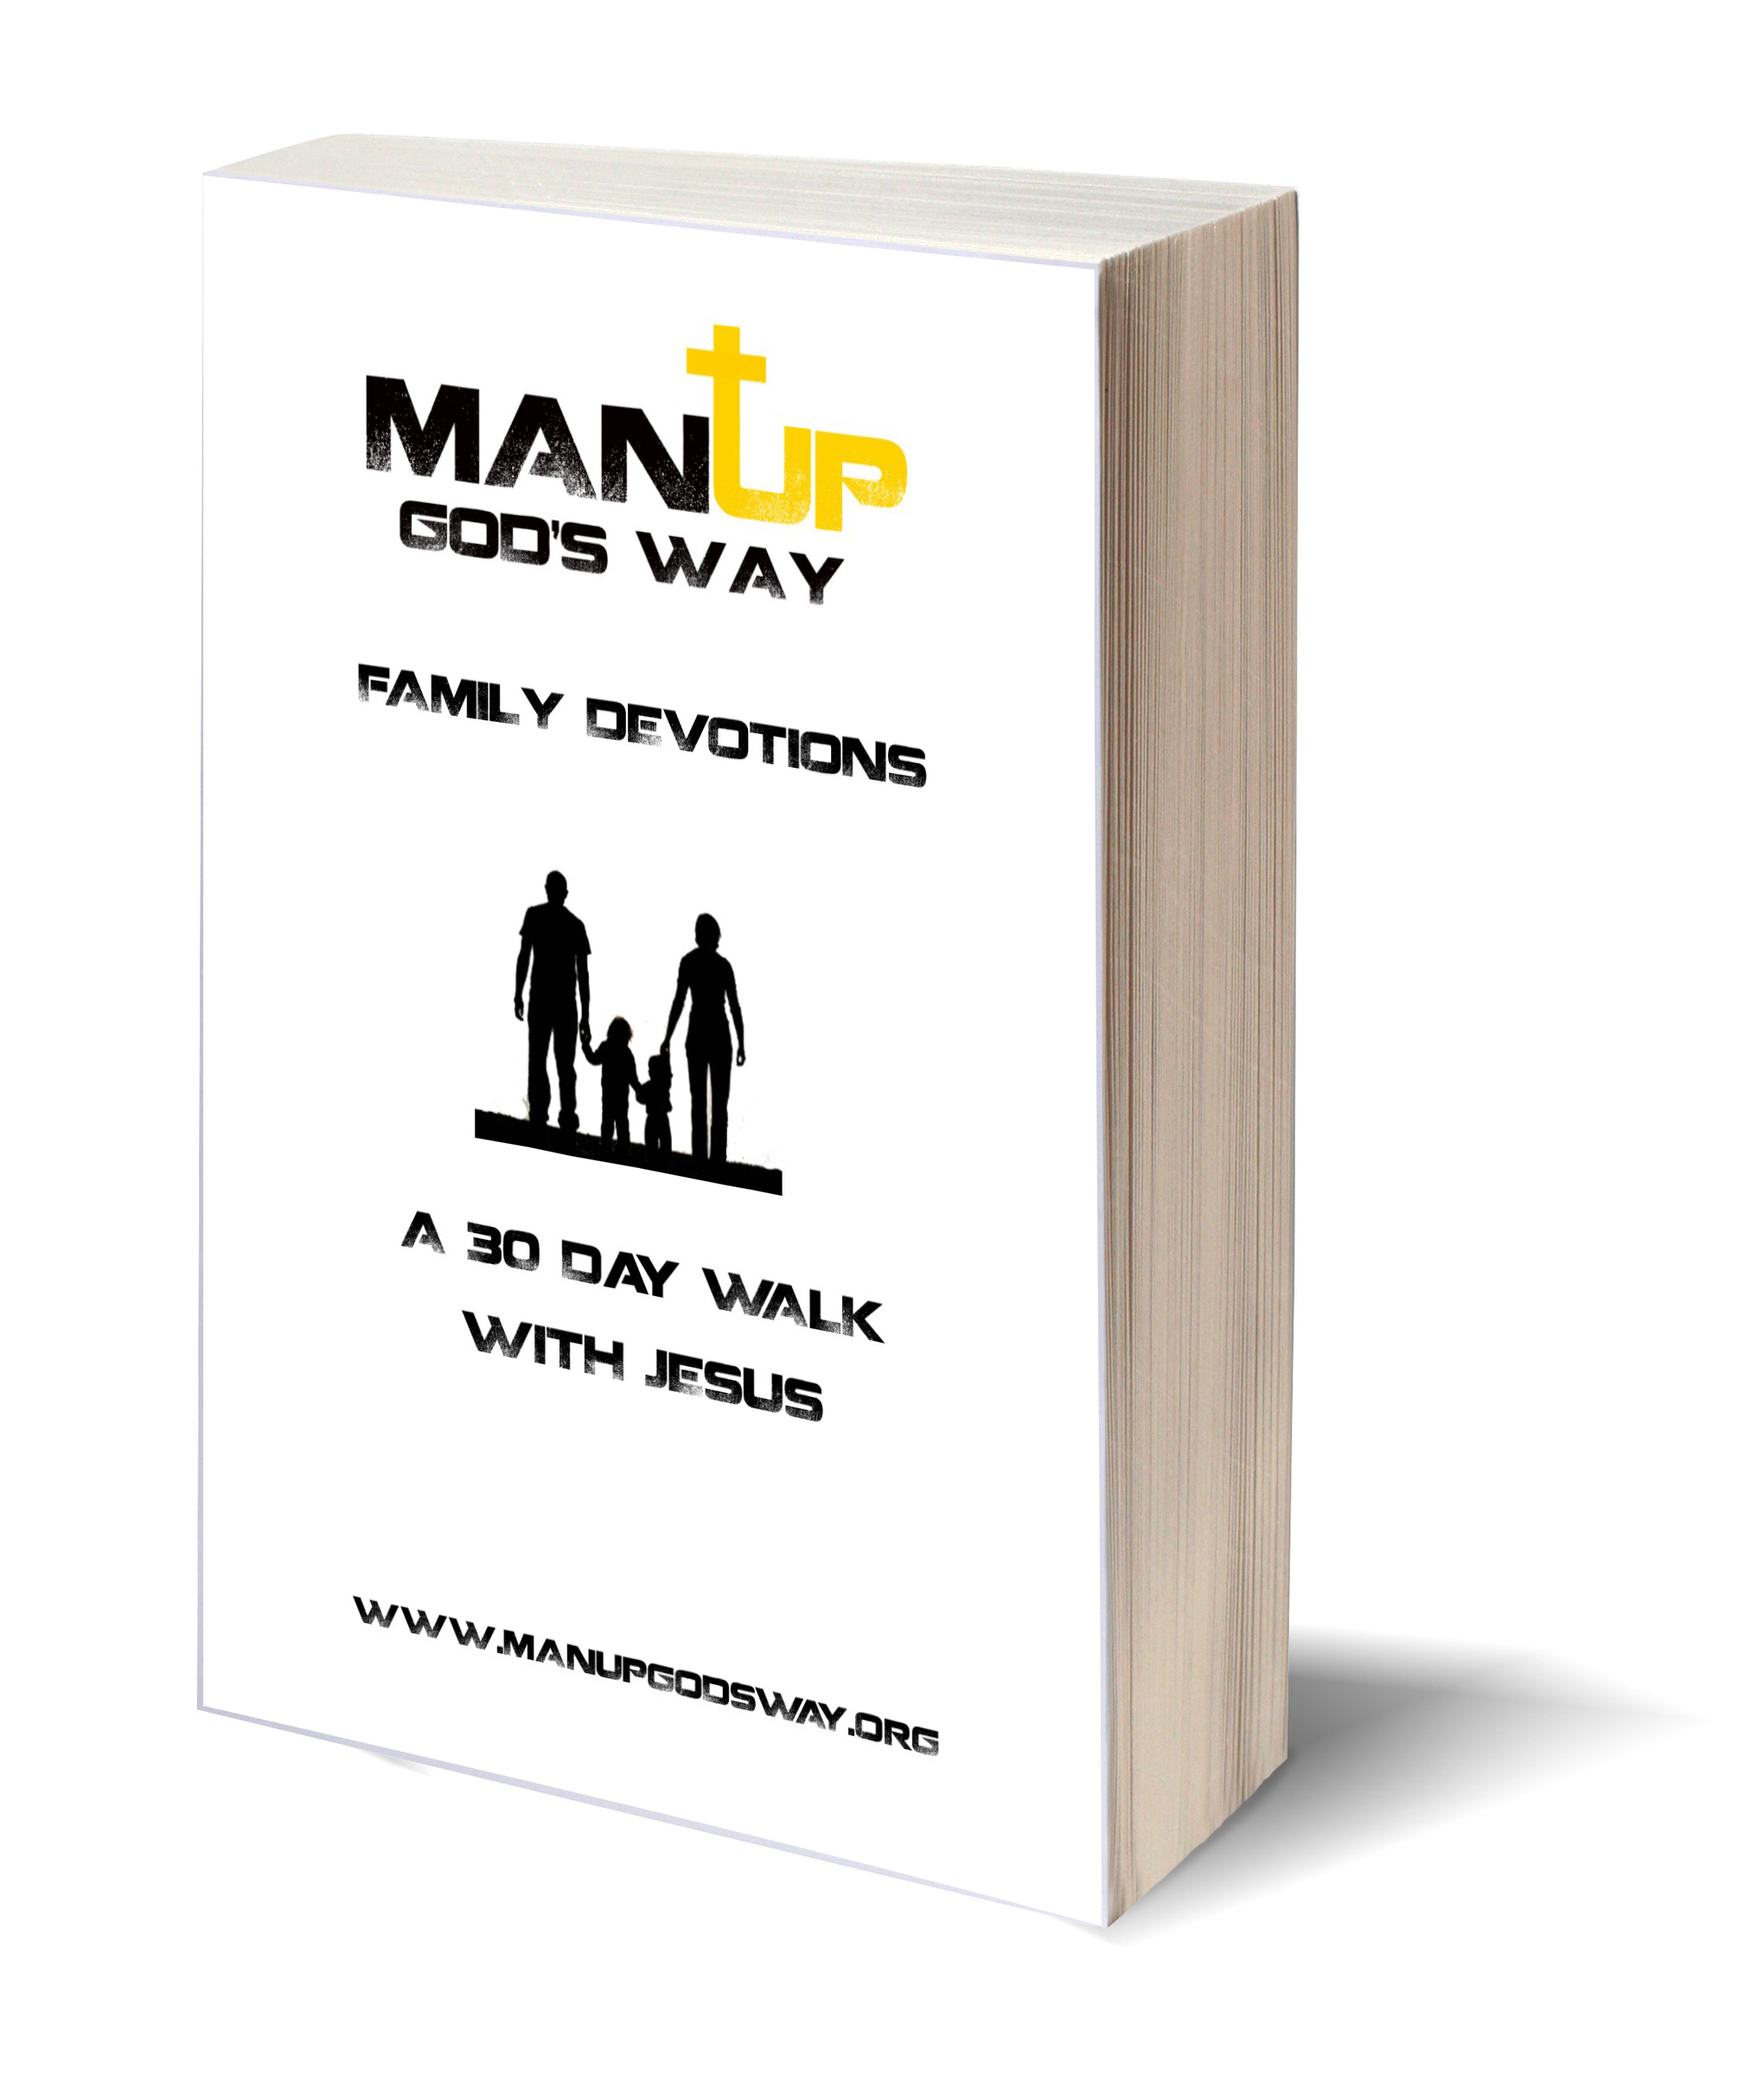 Man up! Becoming a Godly man in an unGodly world